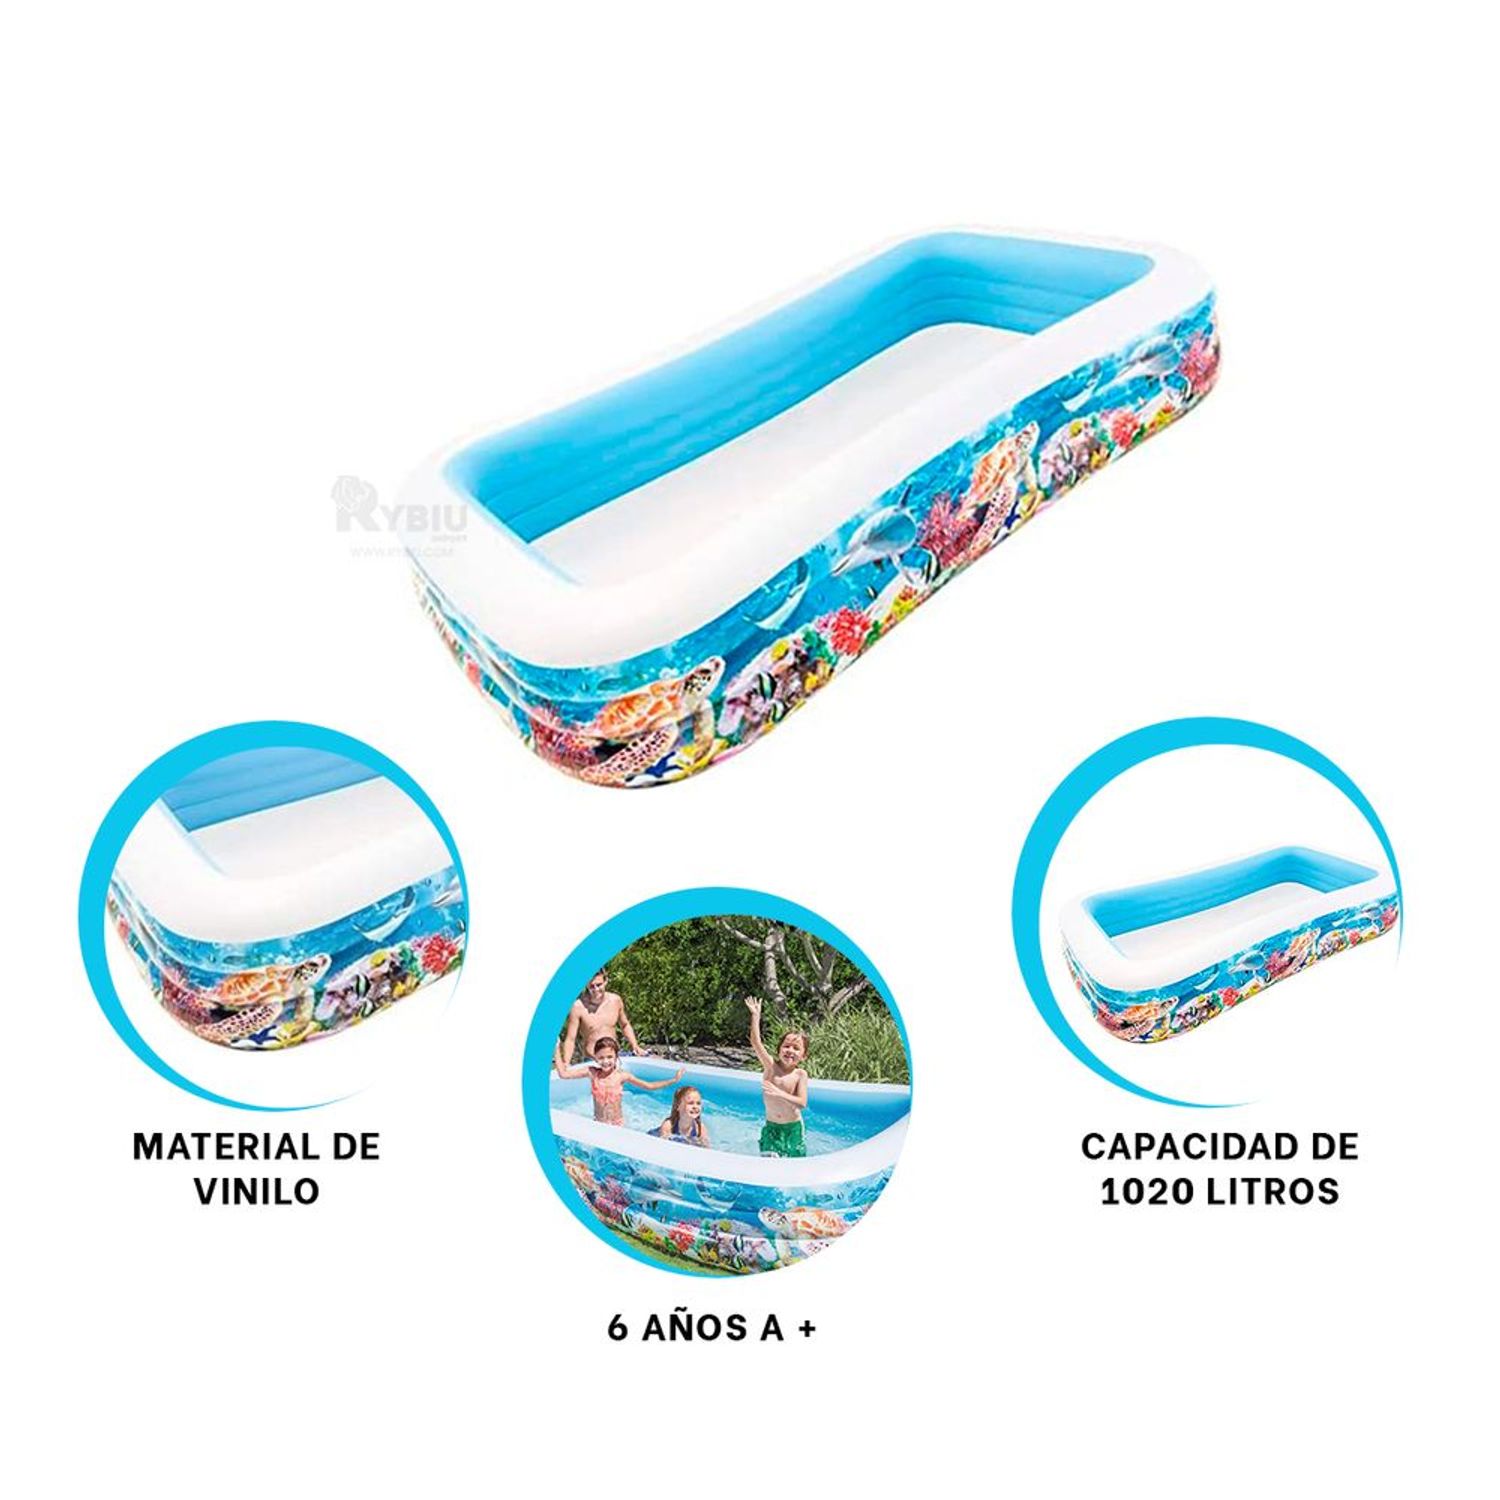 Piscina Inflable Tropical